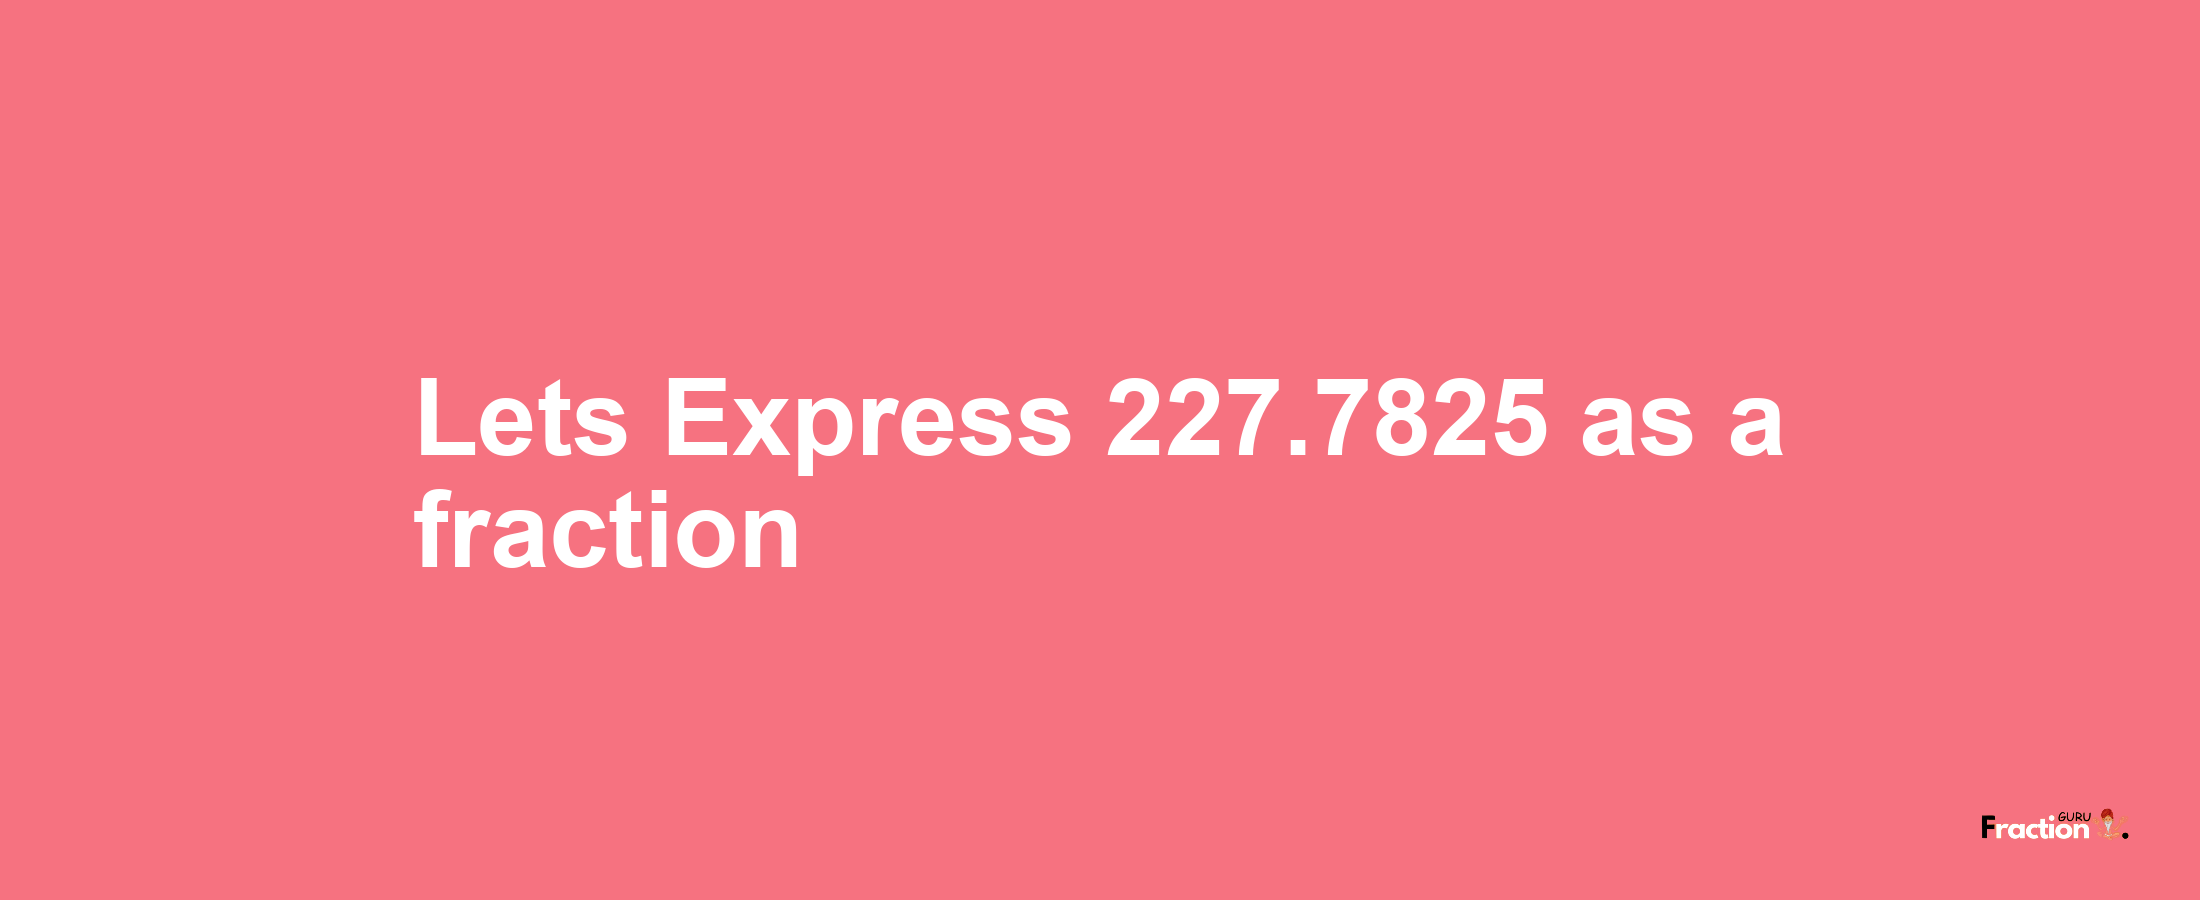 Lets Express 227.7825 as afraction